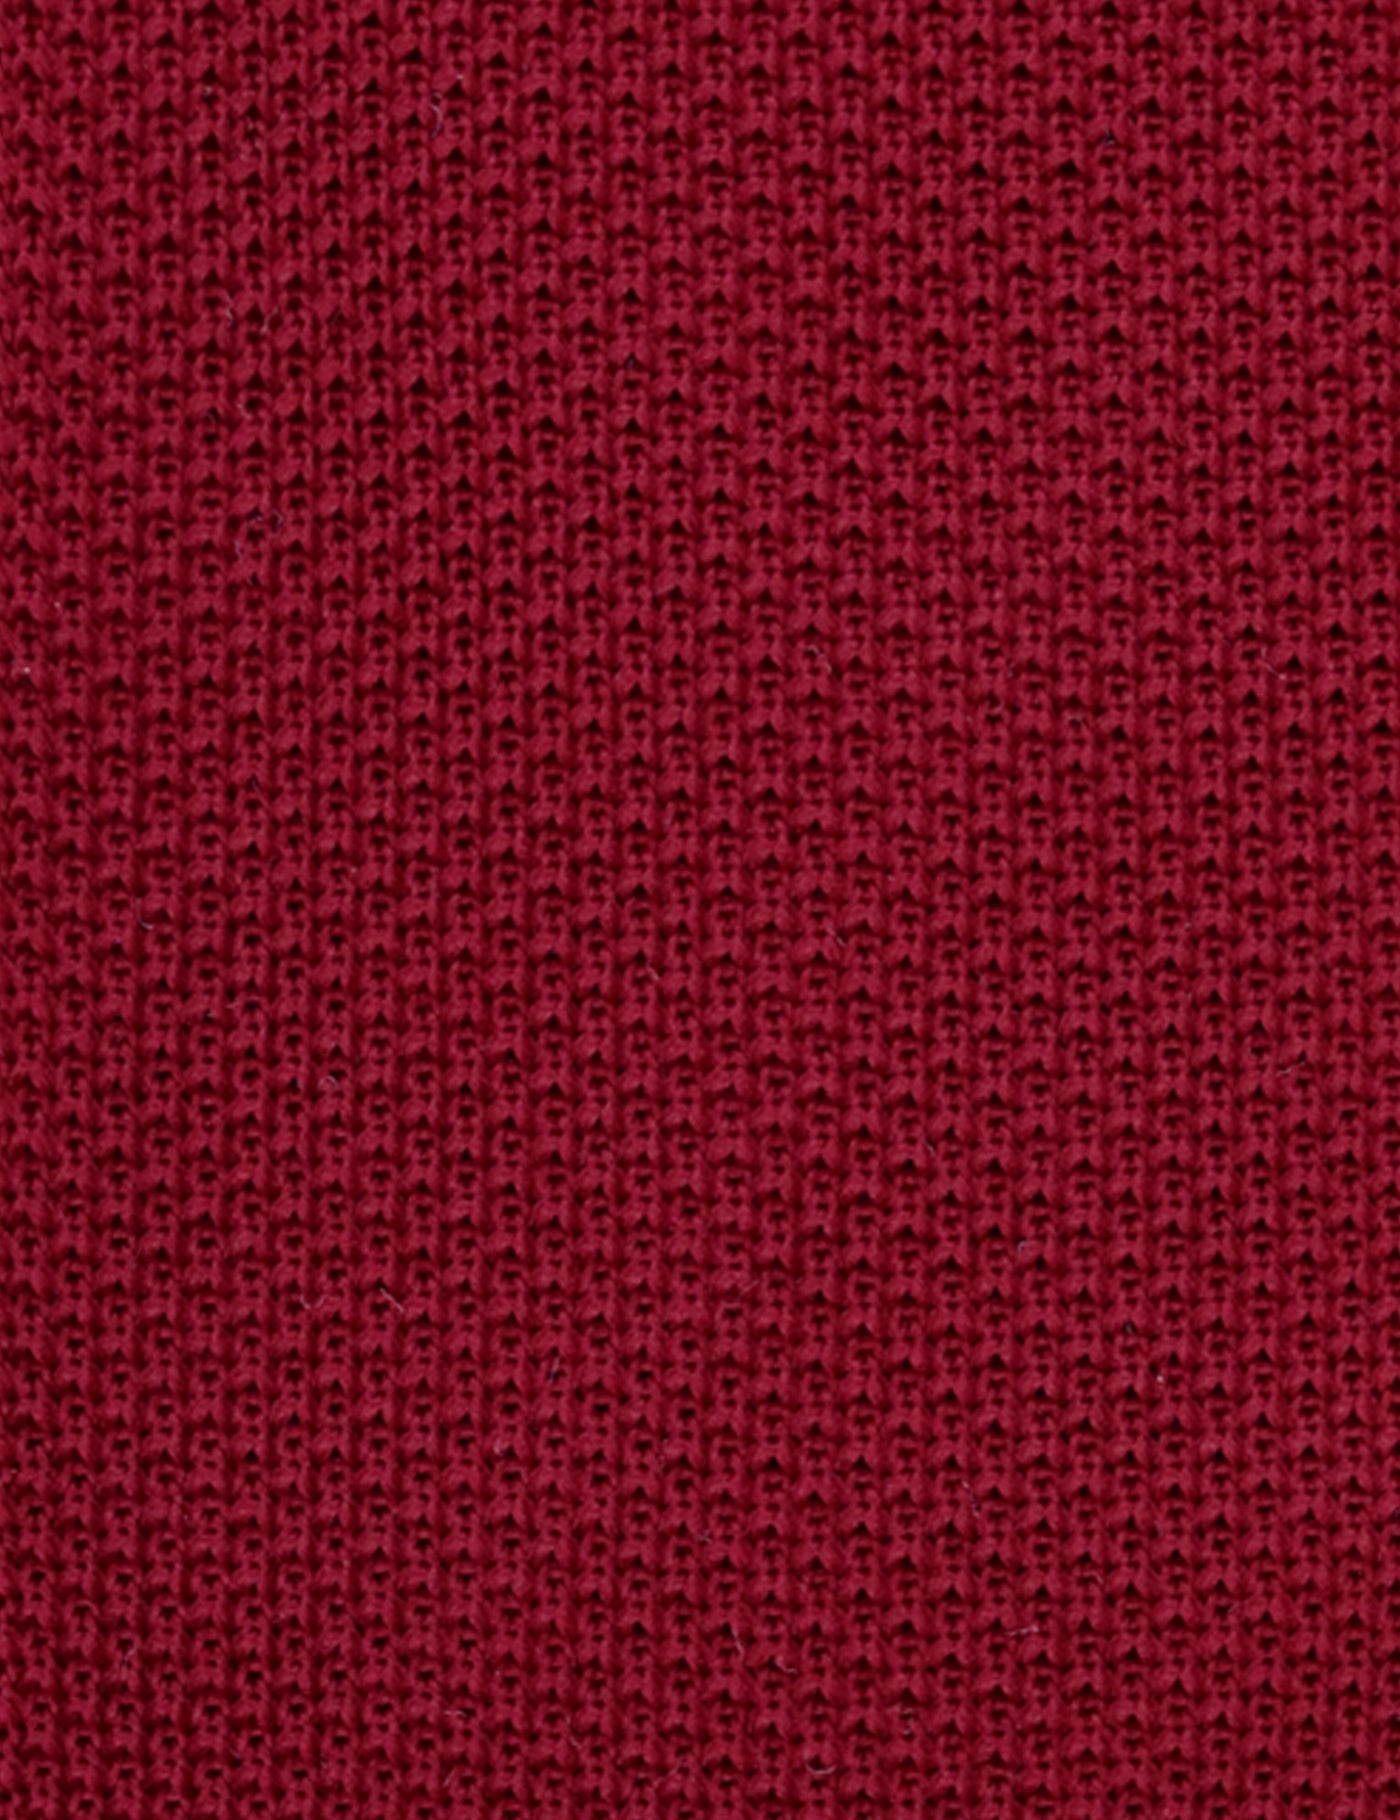 100% Polyester Diamond End Knitted Tie - Red